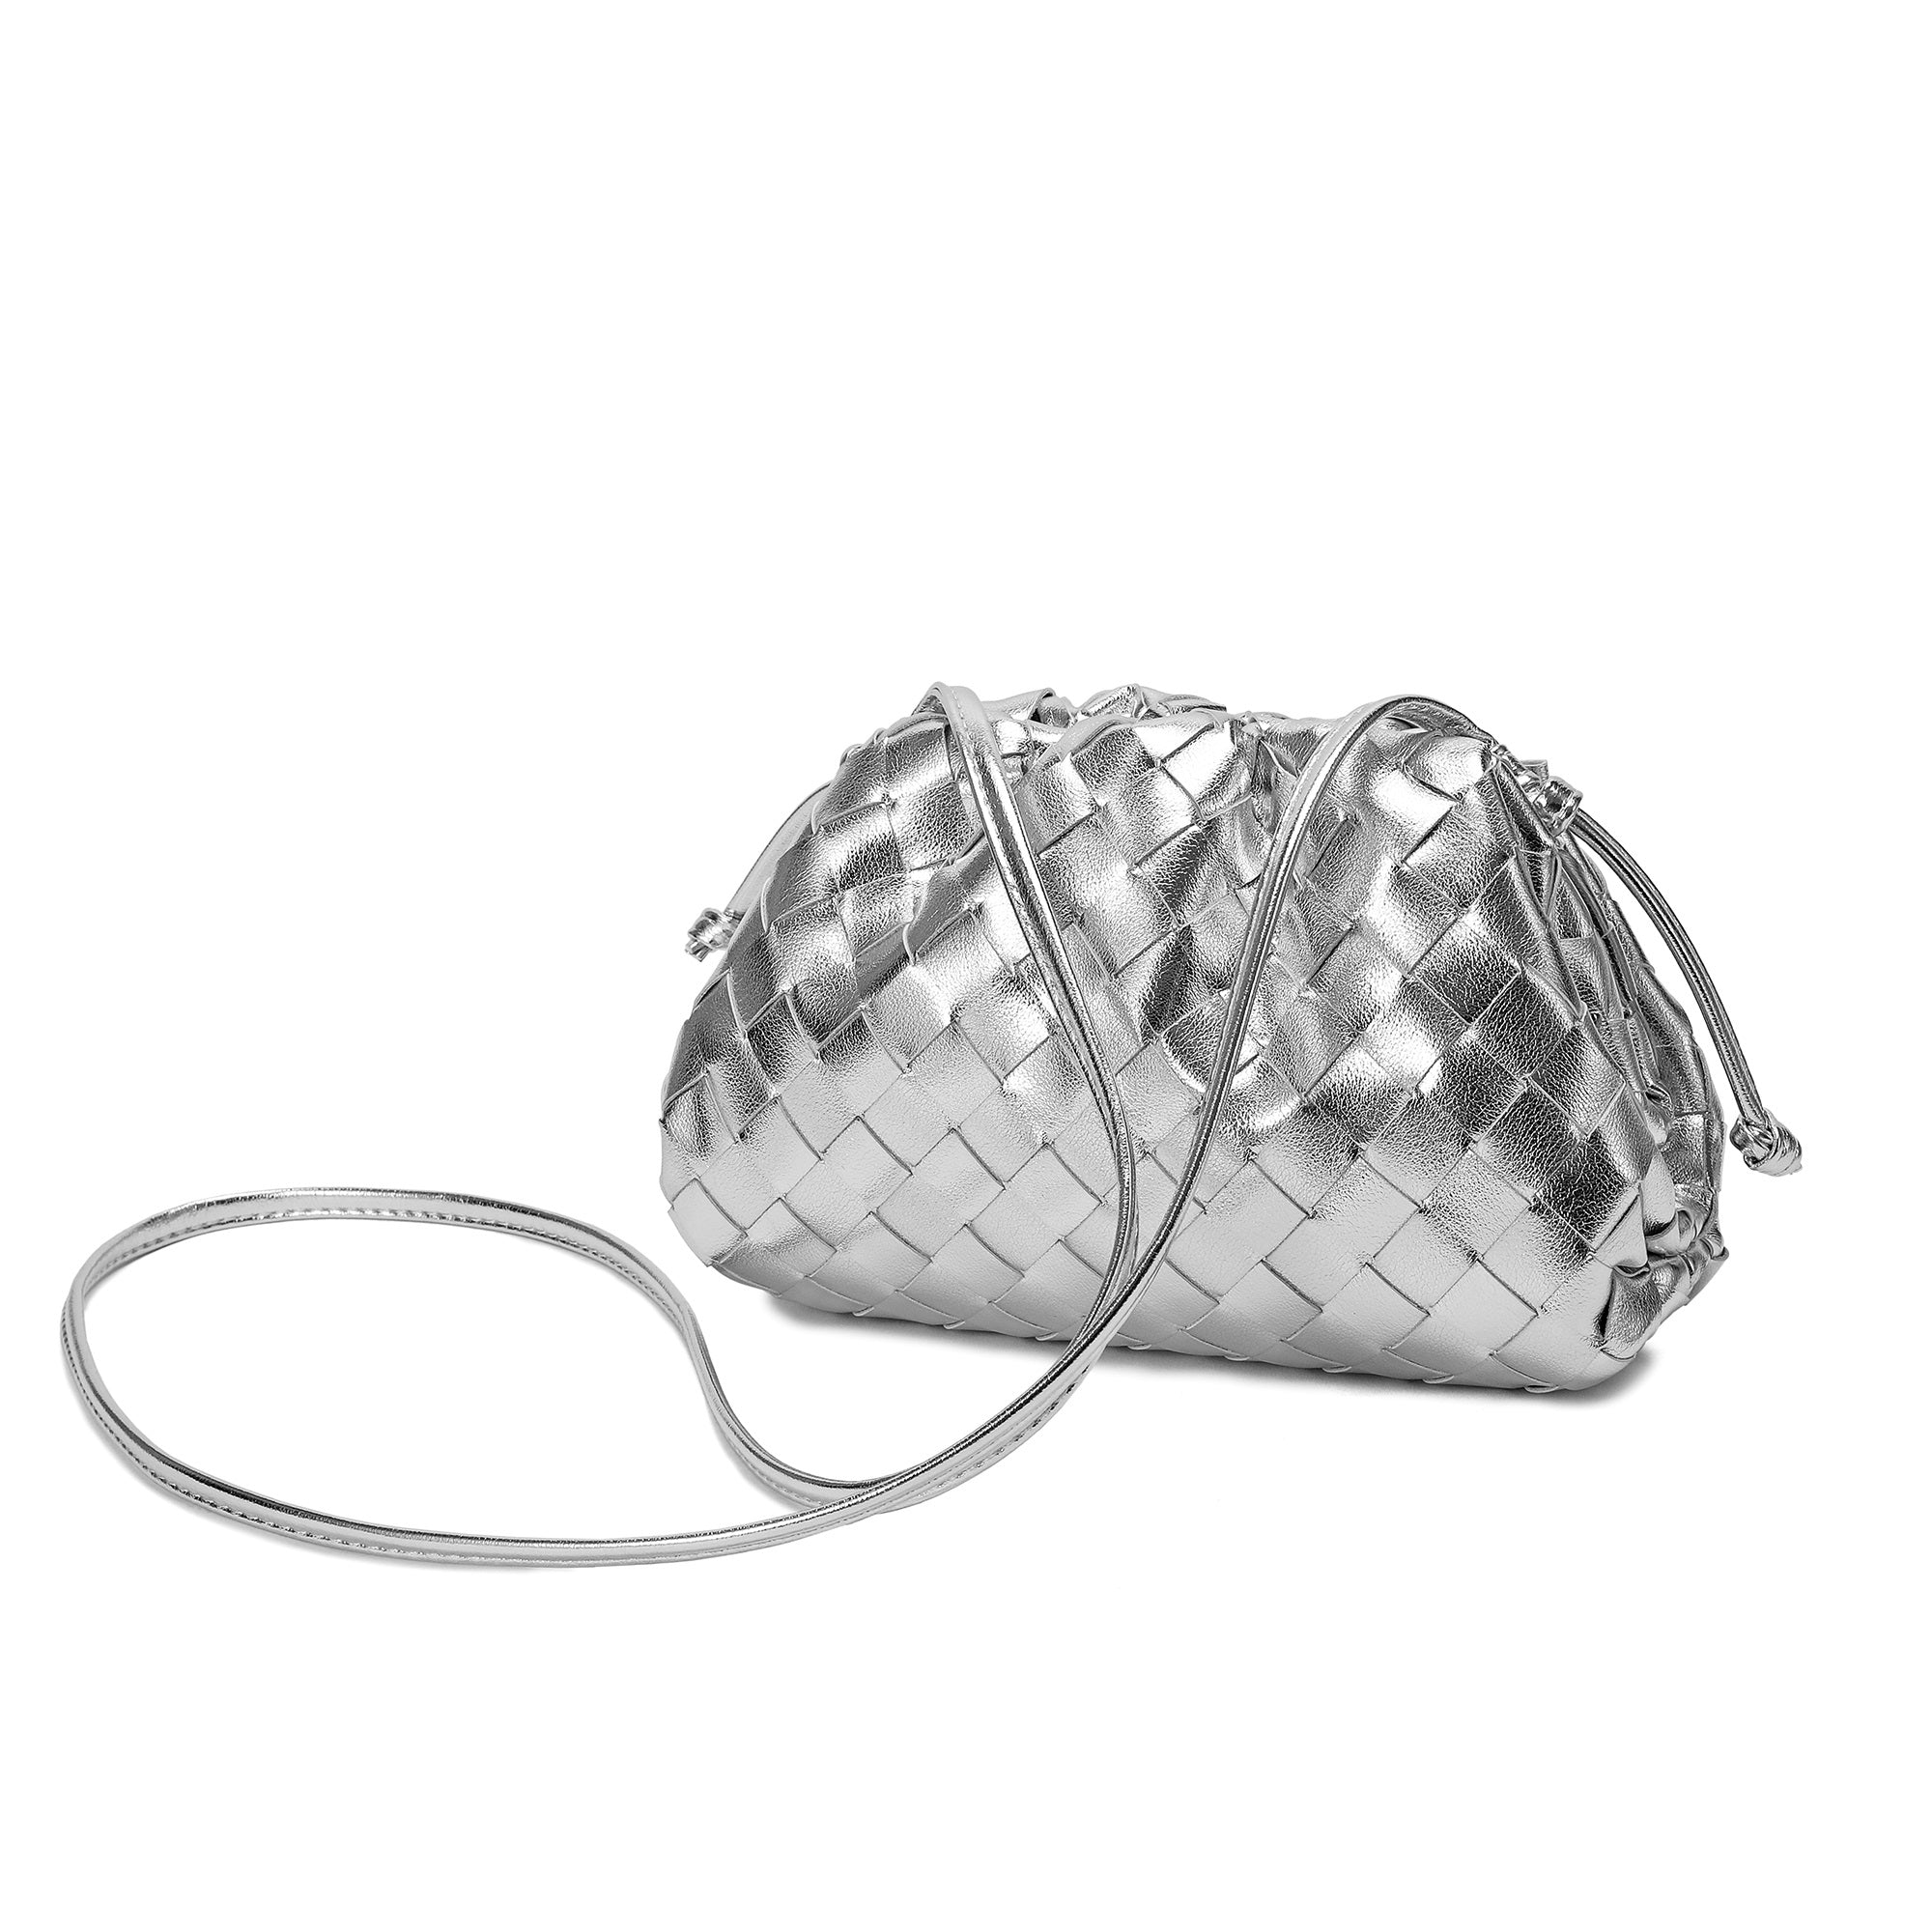 EMMIE | Silver Mirror Fabric Clutch Bag | Summer Collection | JIMMY CHOO US